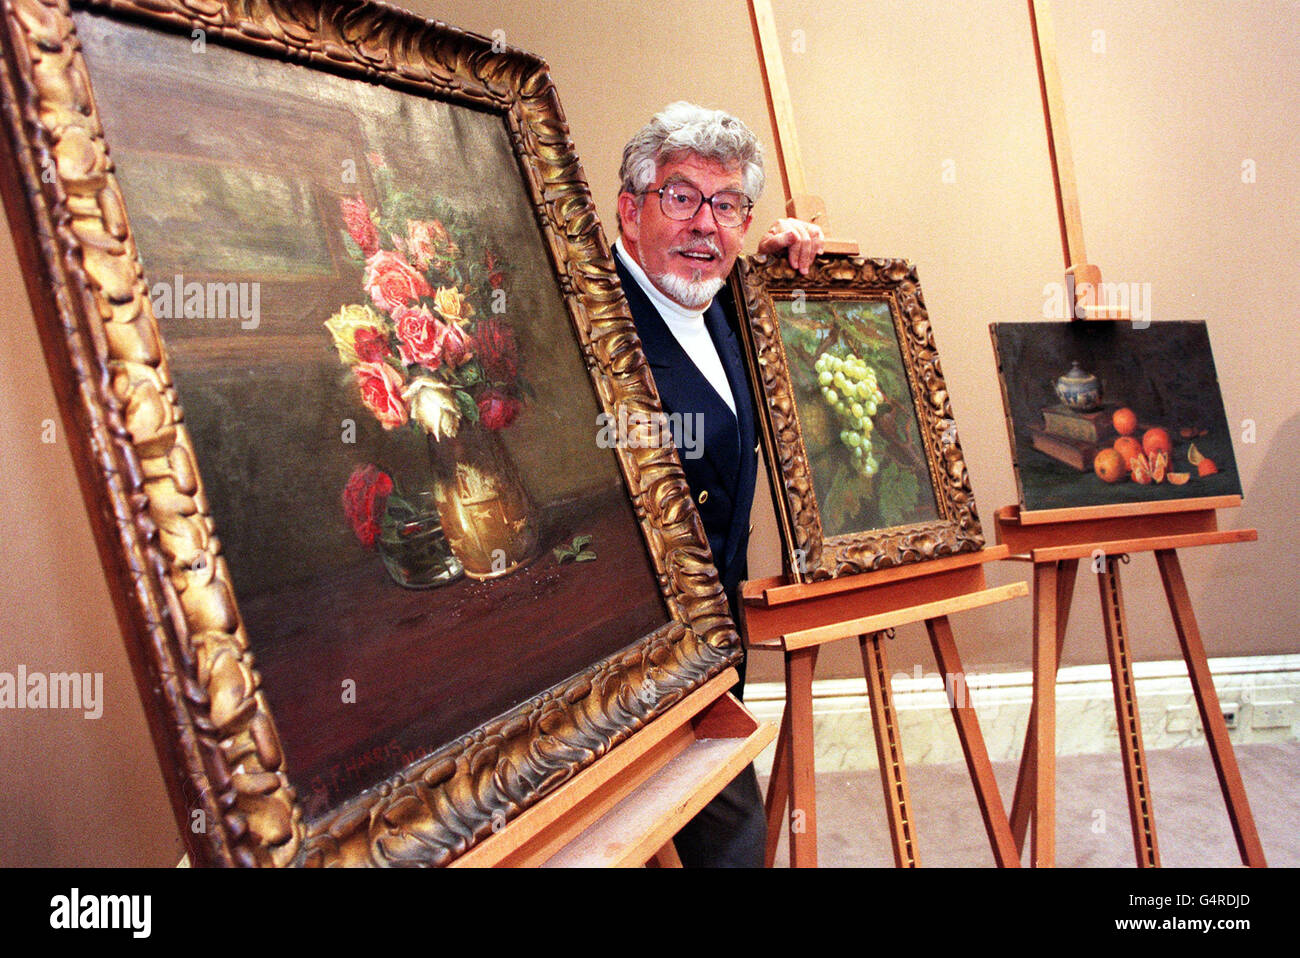 TV presenter and entertainer Rolf Harris with some of his grandfather's paintings at Sotheby's in London. George Harris sold the paintings in 1920 to pay for his trip to Australia, which are due to be auctioned in Sotheby's first Welsh Sale, in Wales on 19-20/10/1999. Stock Photo